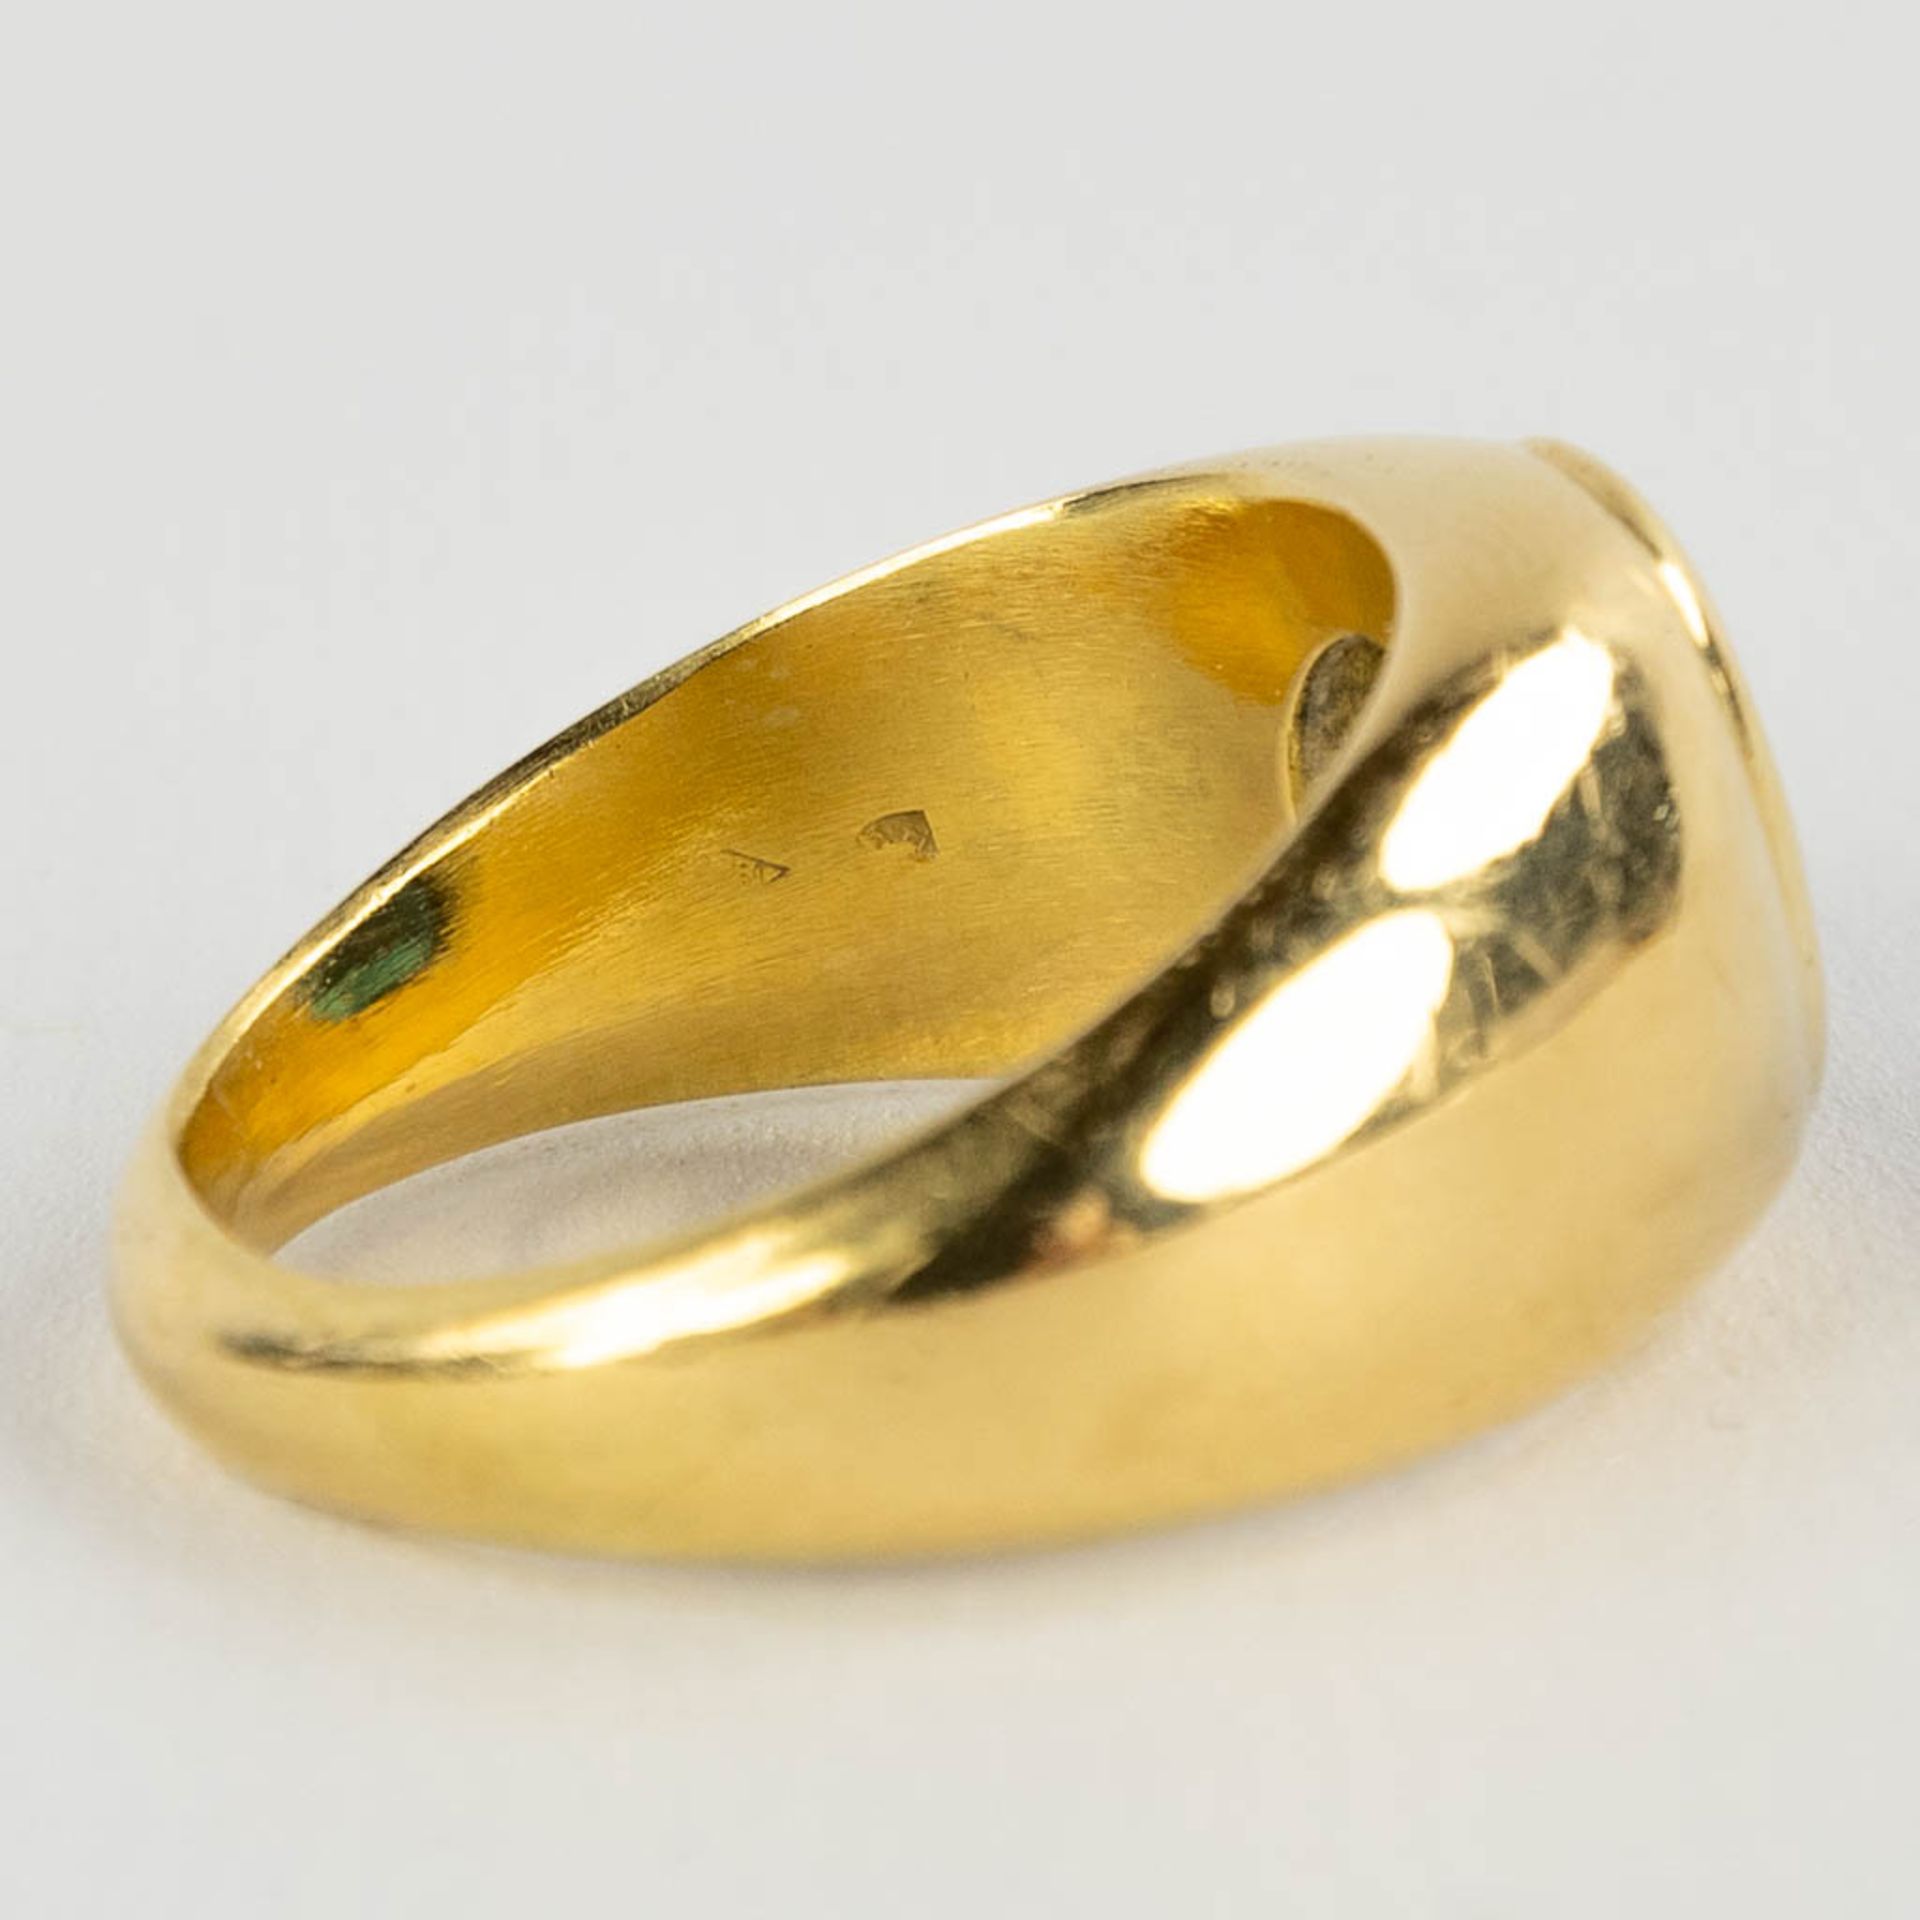 A yellow gold ring with a large facetted sapphire. 22,56g. - Image 9 of 9